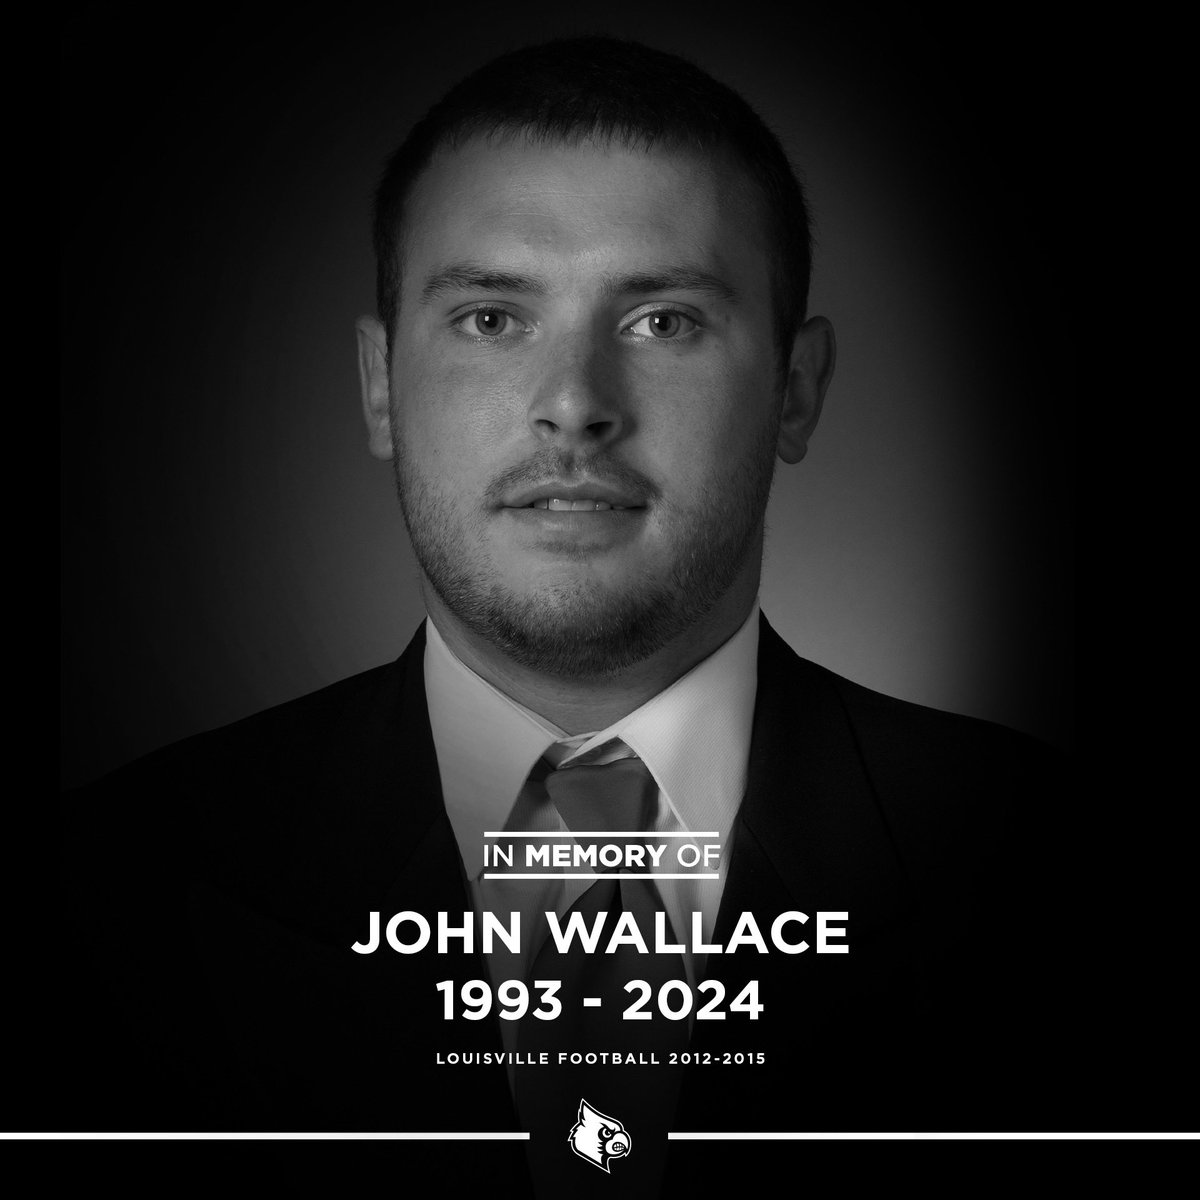 We are saddened by the passing of Cardinal Forever John Wallace.

Our thoughts are with his loved ones.

#GoCards